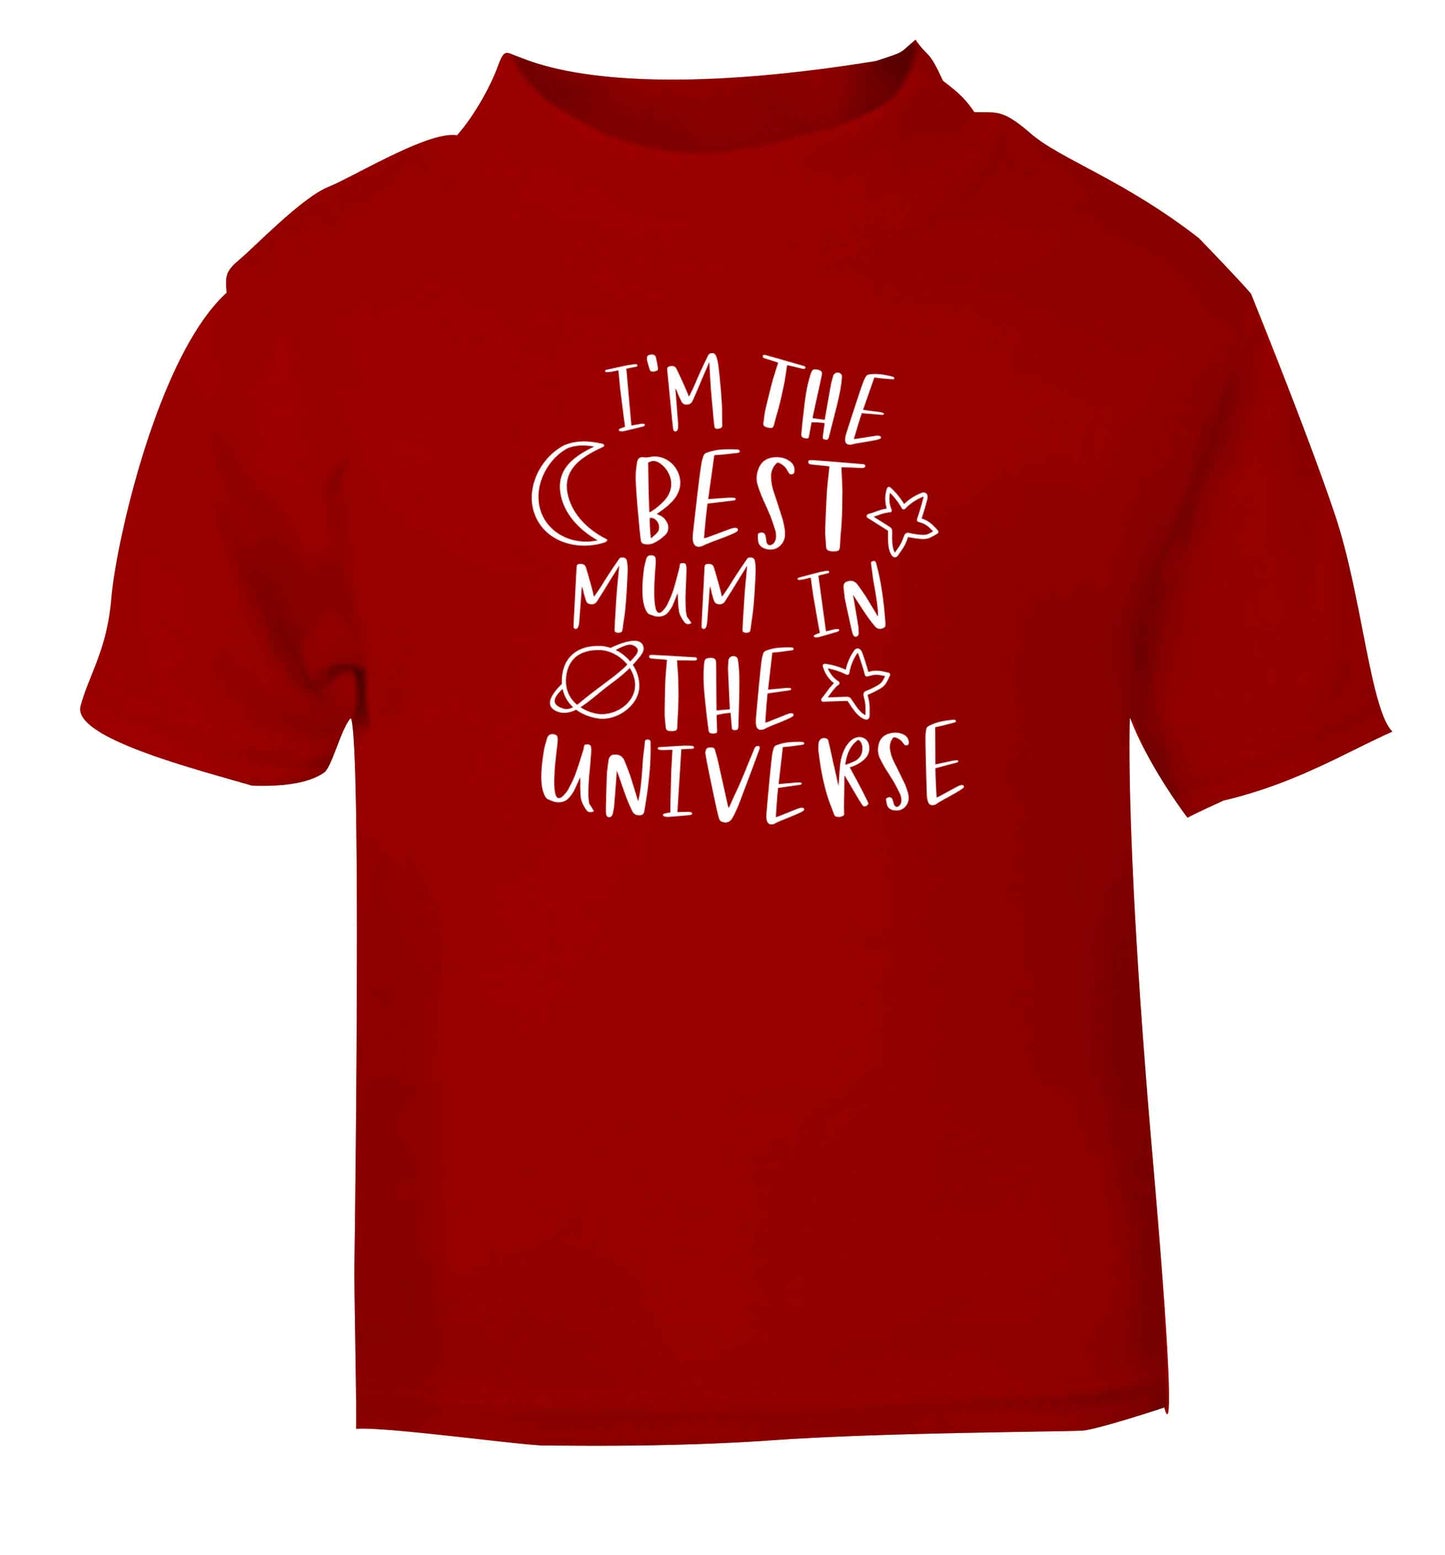 I'm the best mum in the universe red baby toddler Tshirt 2 Years